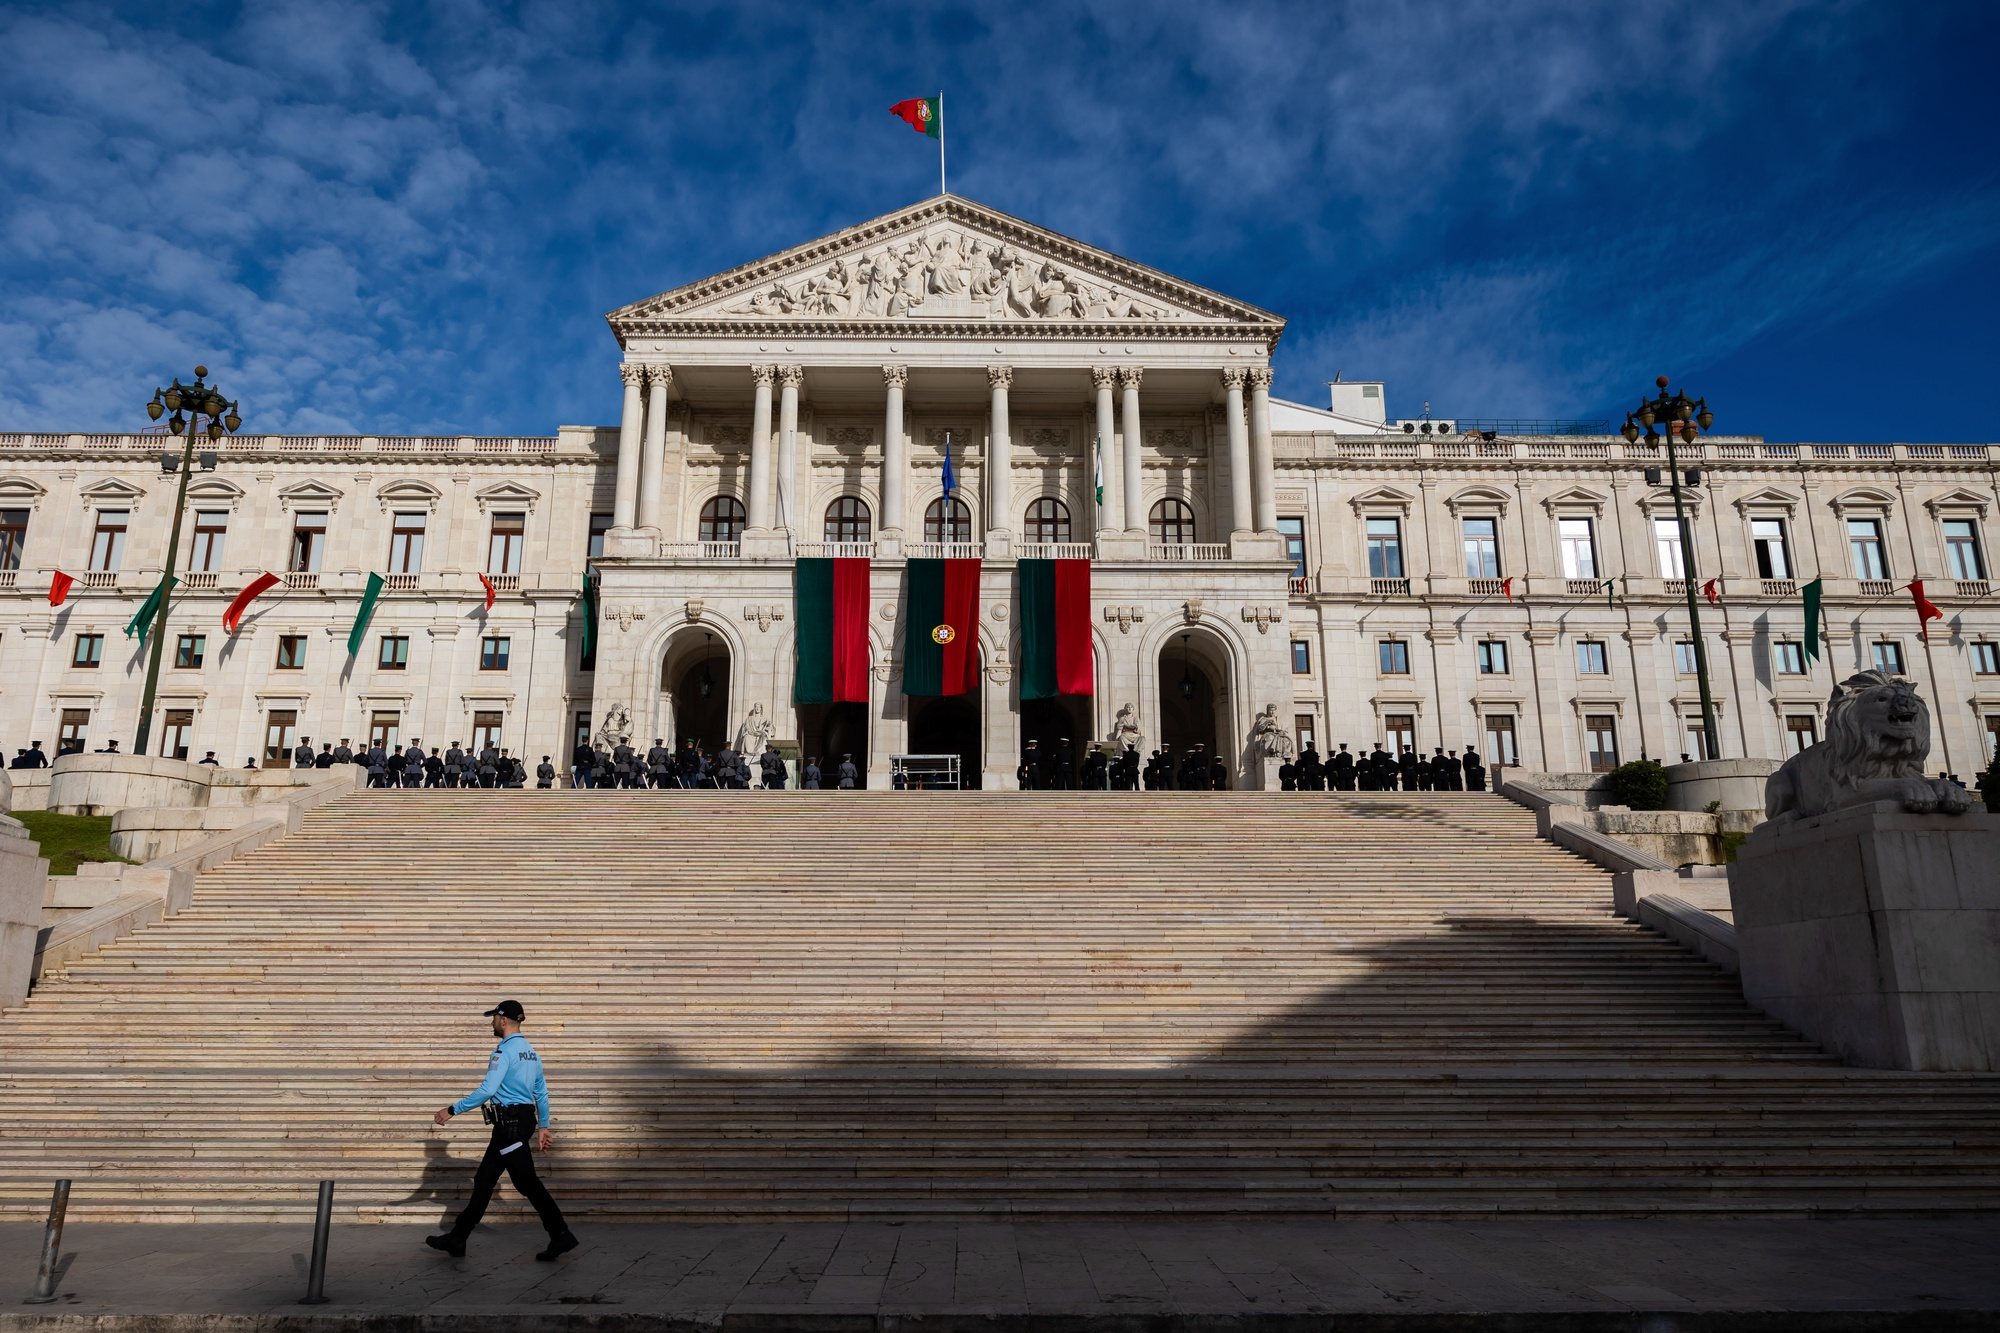 A police officer walks in front of the Portuguese Parliament before the Carnation Revolution 50th anniversary solemn comemorative session, in Lisbon, Portugal, 25 April 2024. Portugal celebrates the 50th anniversary of the Carnation Revolution that ended the authoritarian regime of Estado Novo (New State) that ruled the country between 1926 to 1974. JOSE SENA GOULAO/LUSA